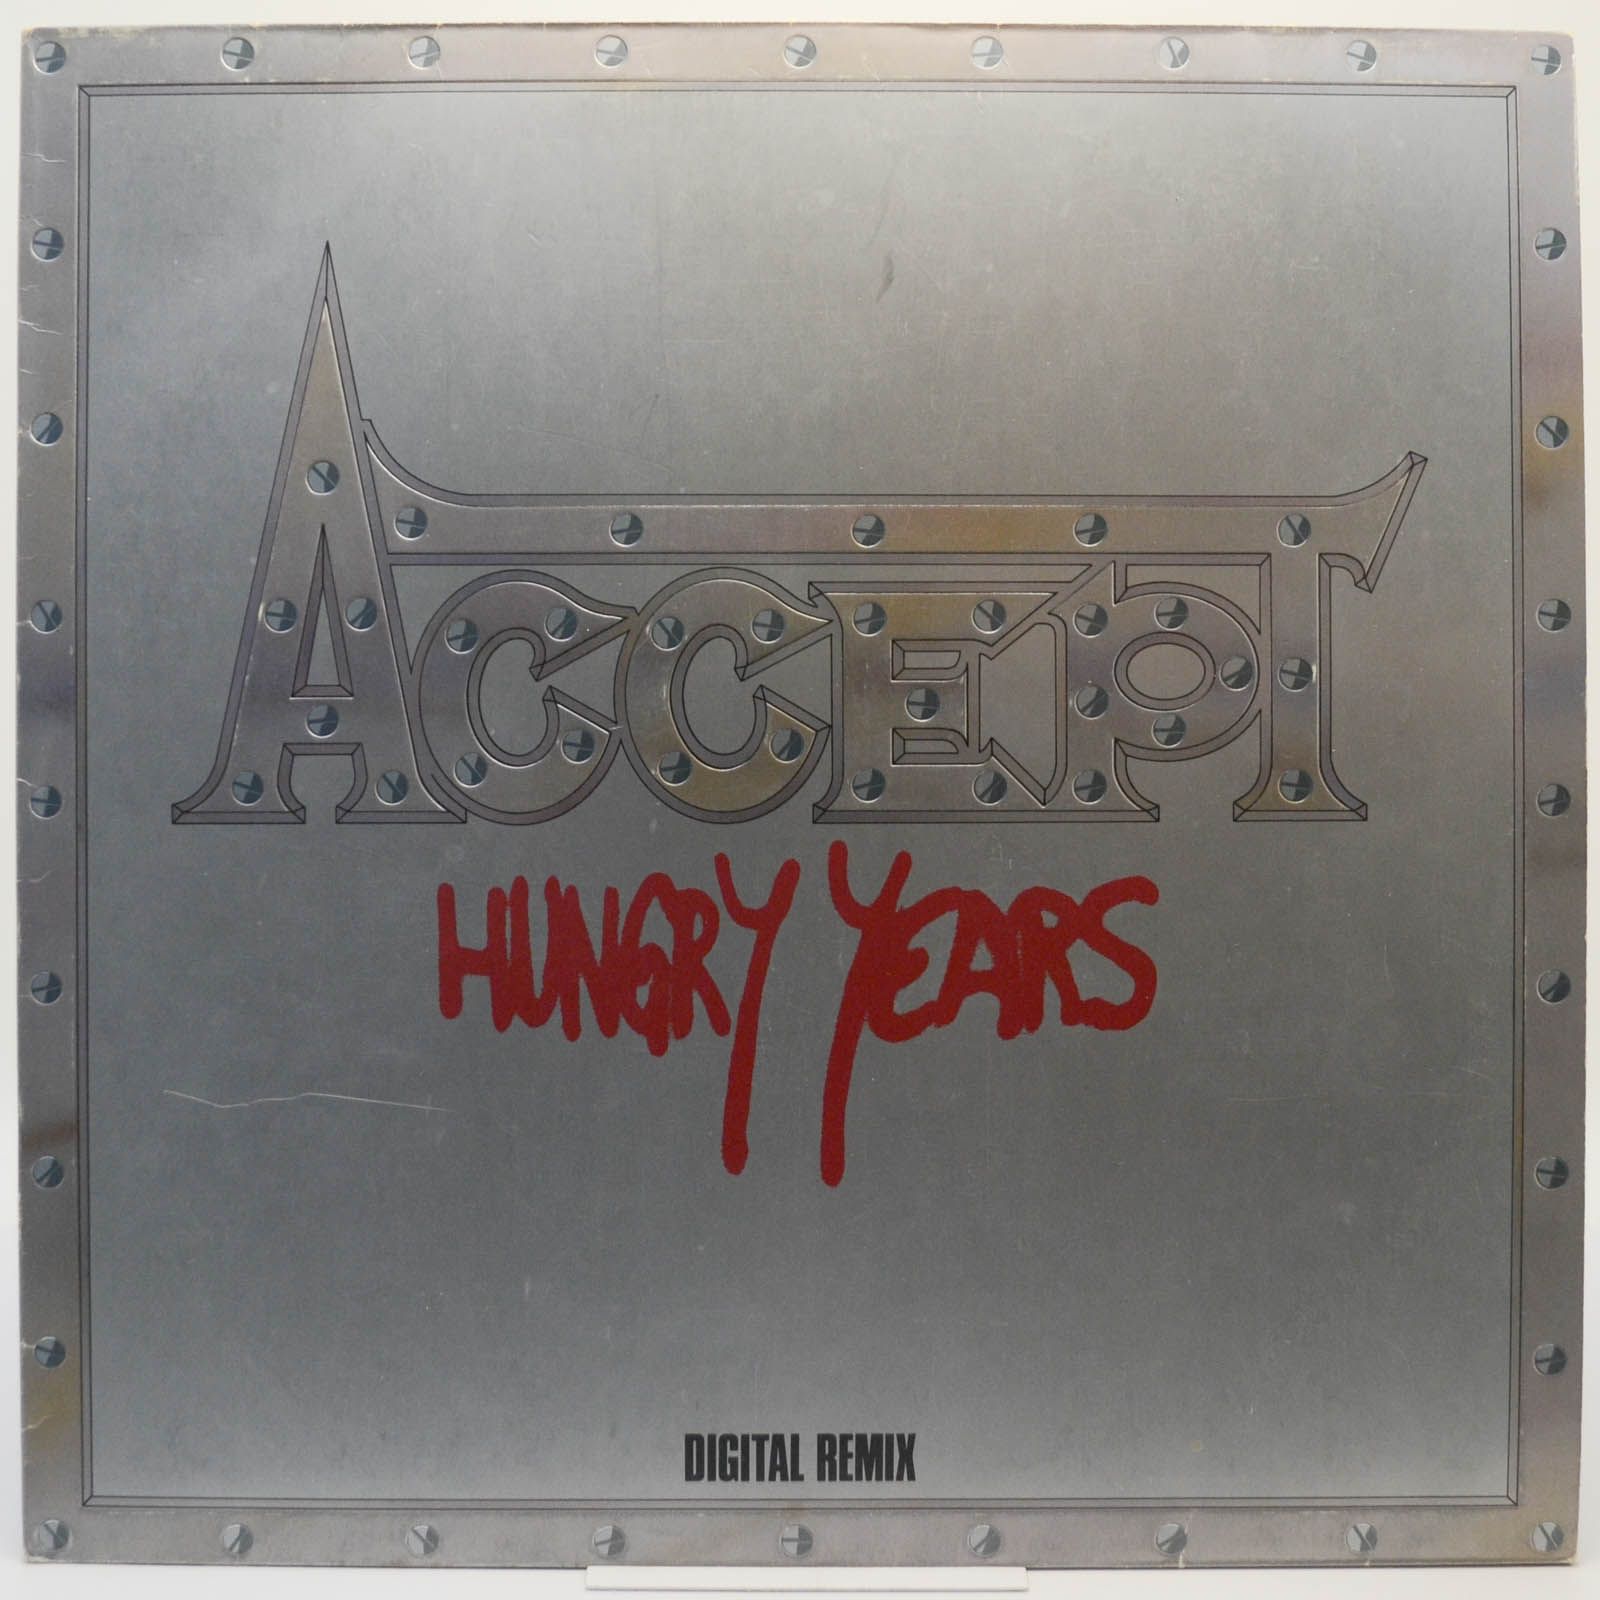 Accept — Hungry Years, 1987